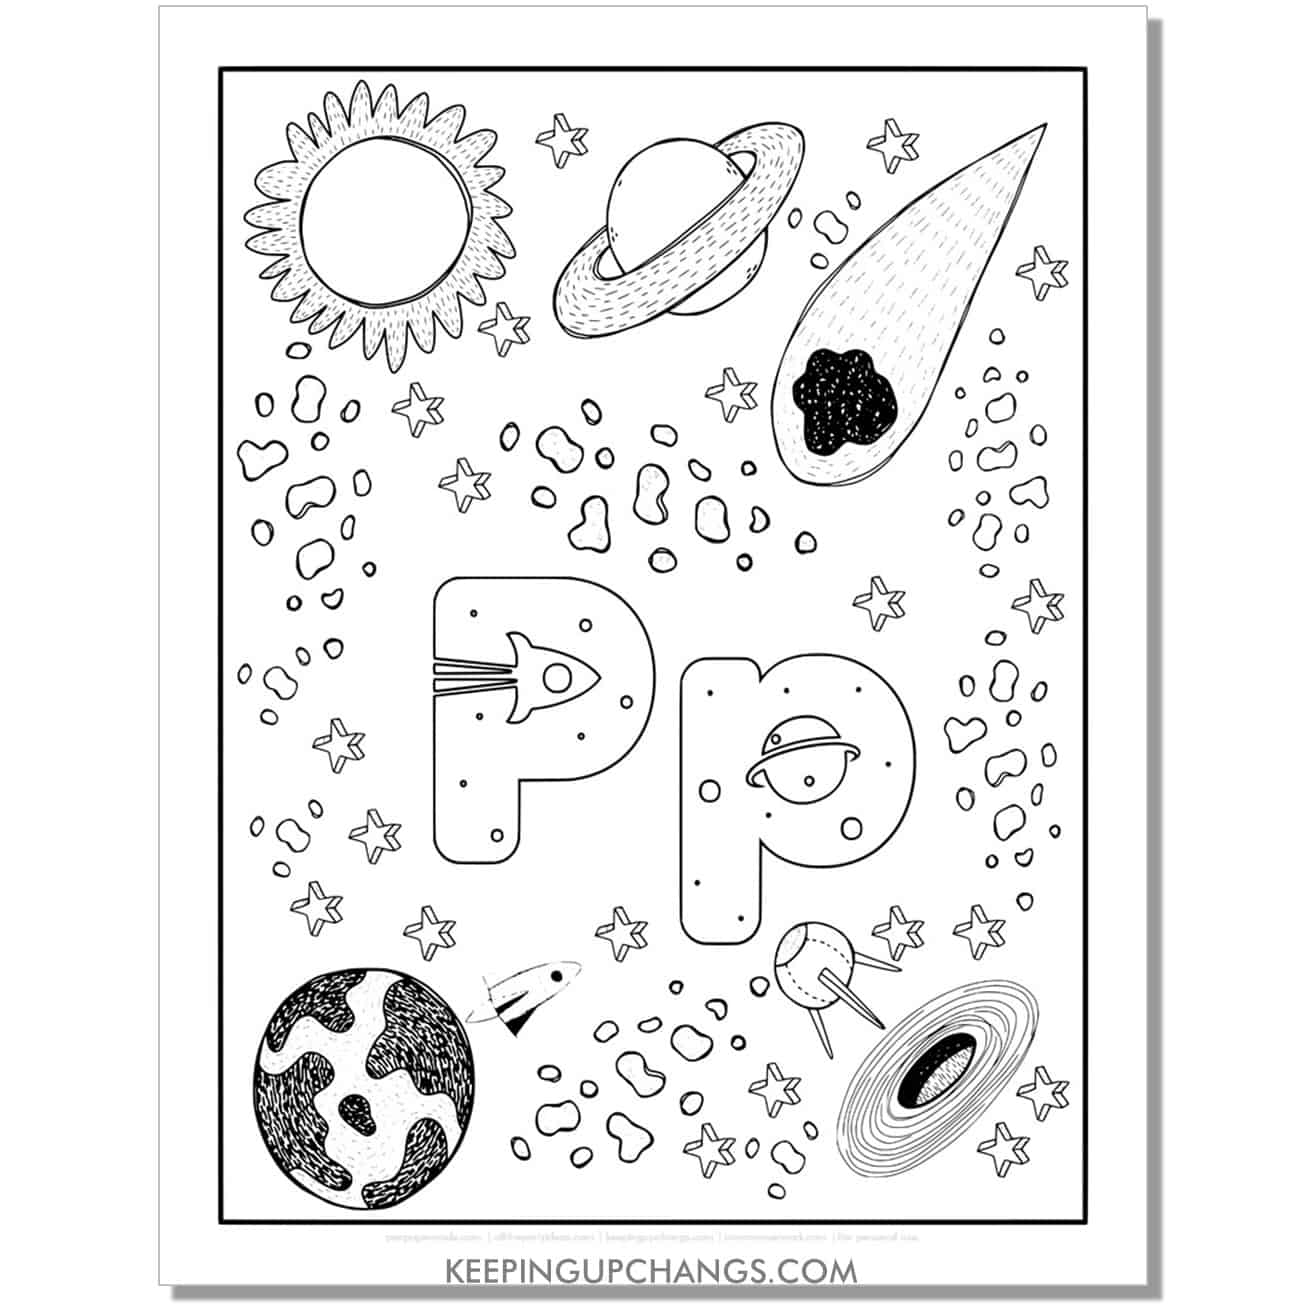 free alphabet letter p coloring page for kids with rockets, space theme.